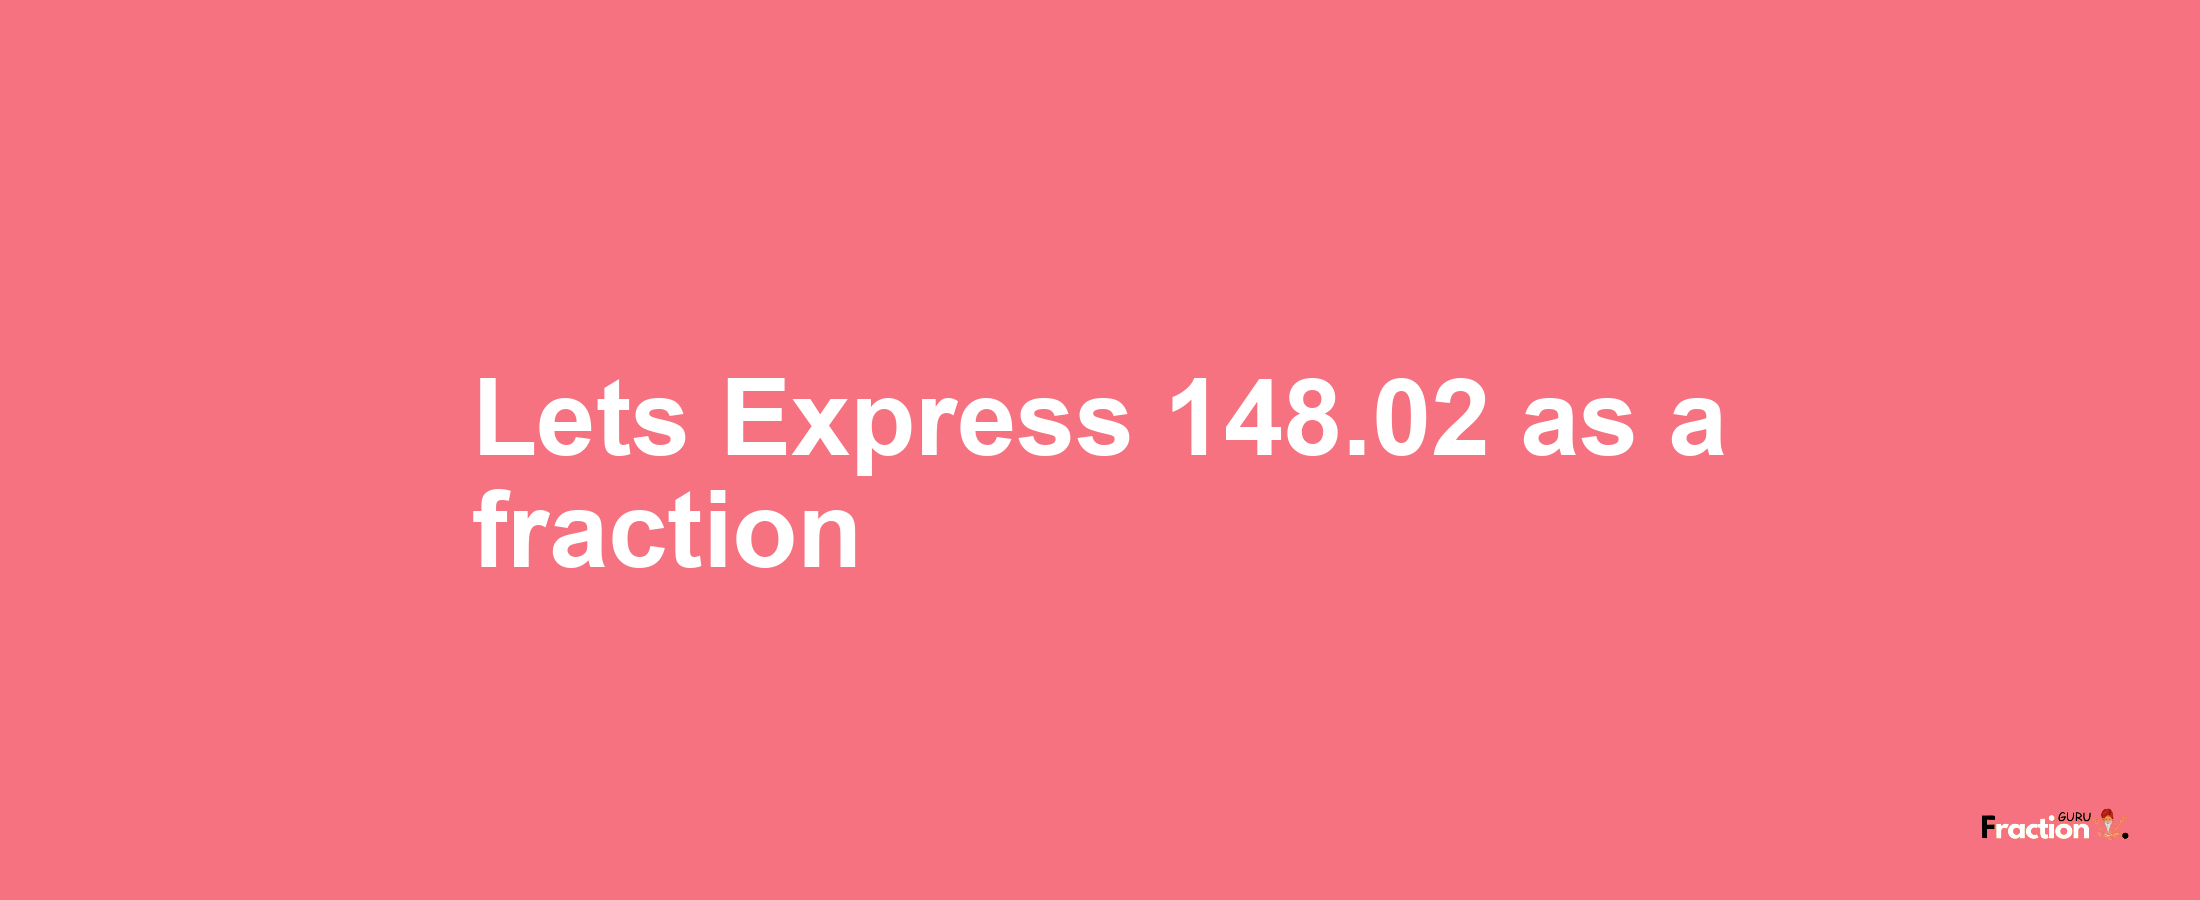 Lets Express 148.02 as afraction